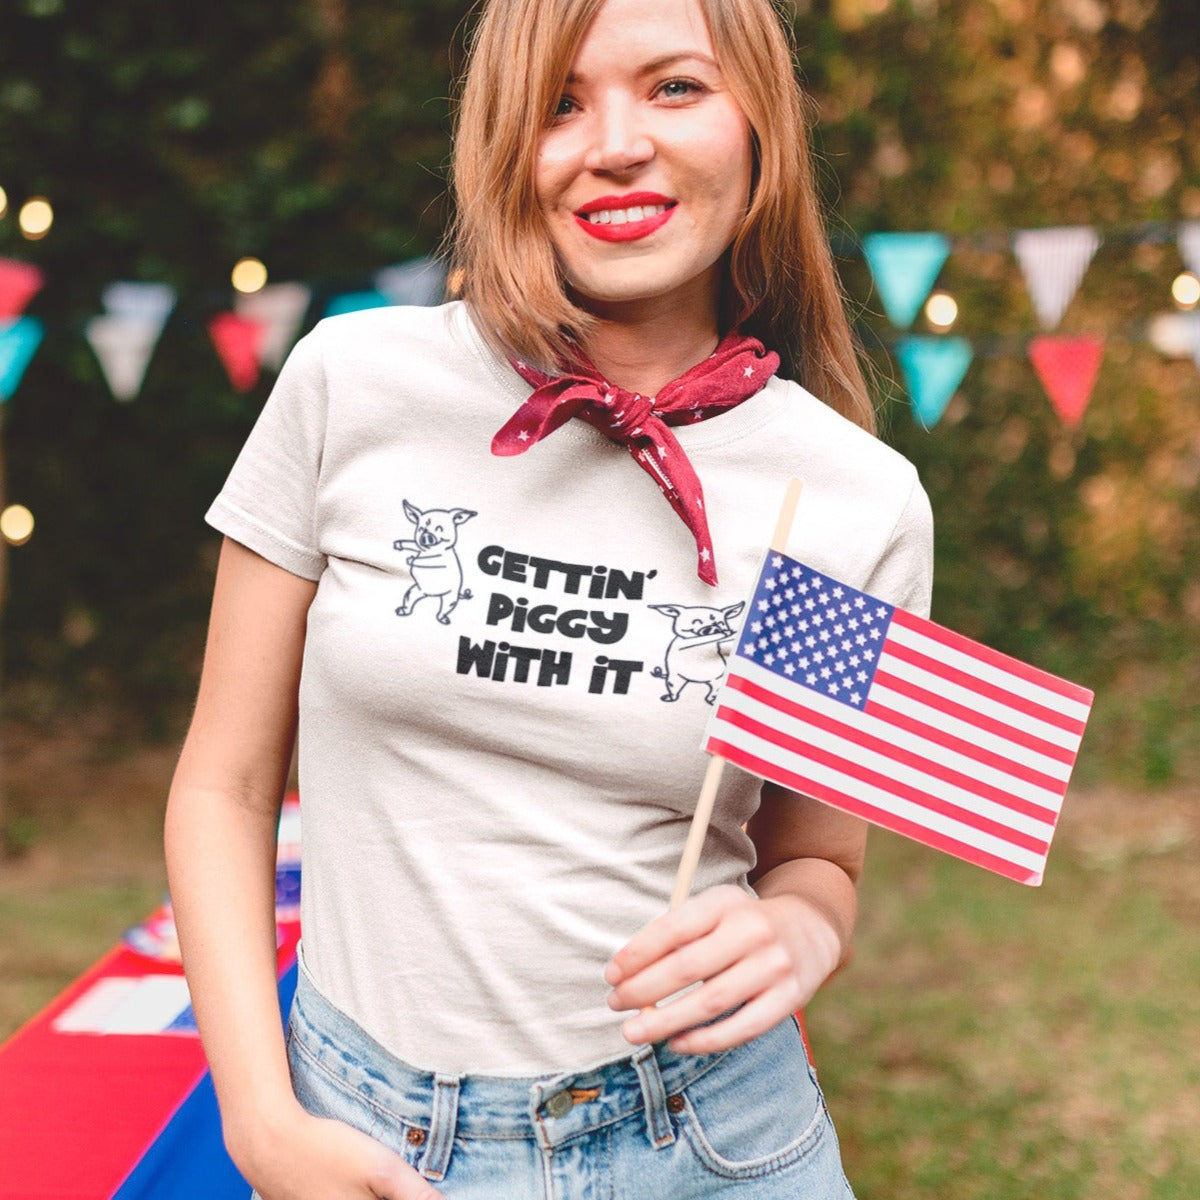 gettin-piggy-with-it-white-t-shirt-funny-dancing-pigs-smiling-patriot-girl-wearing-a-t-shirt-mockup-at-a-4th-of-july-bbq-party